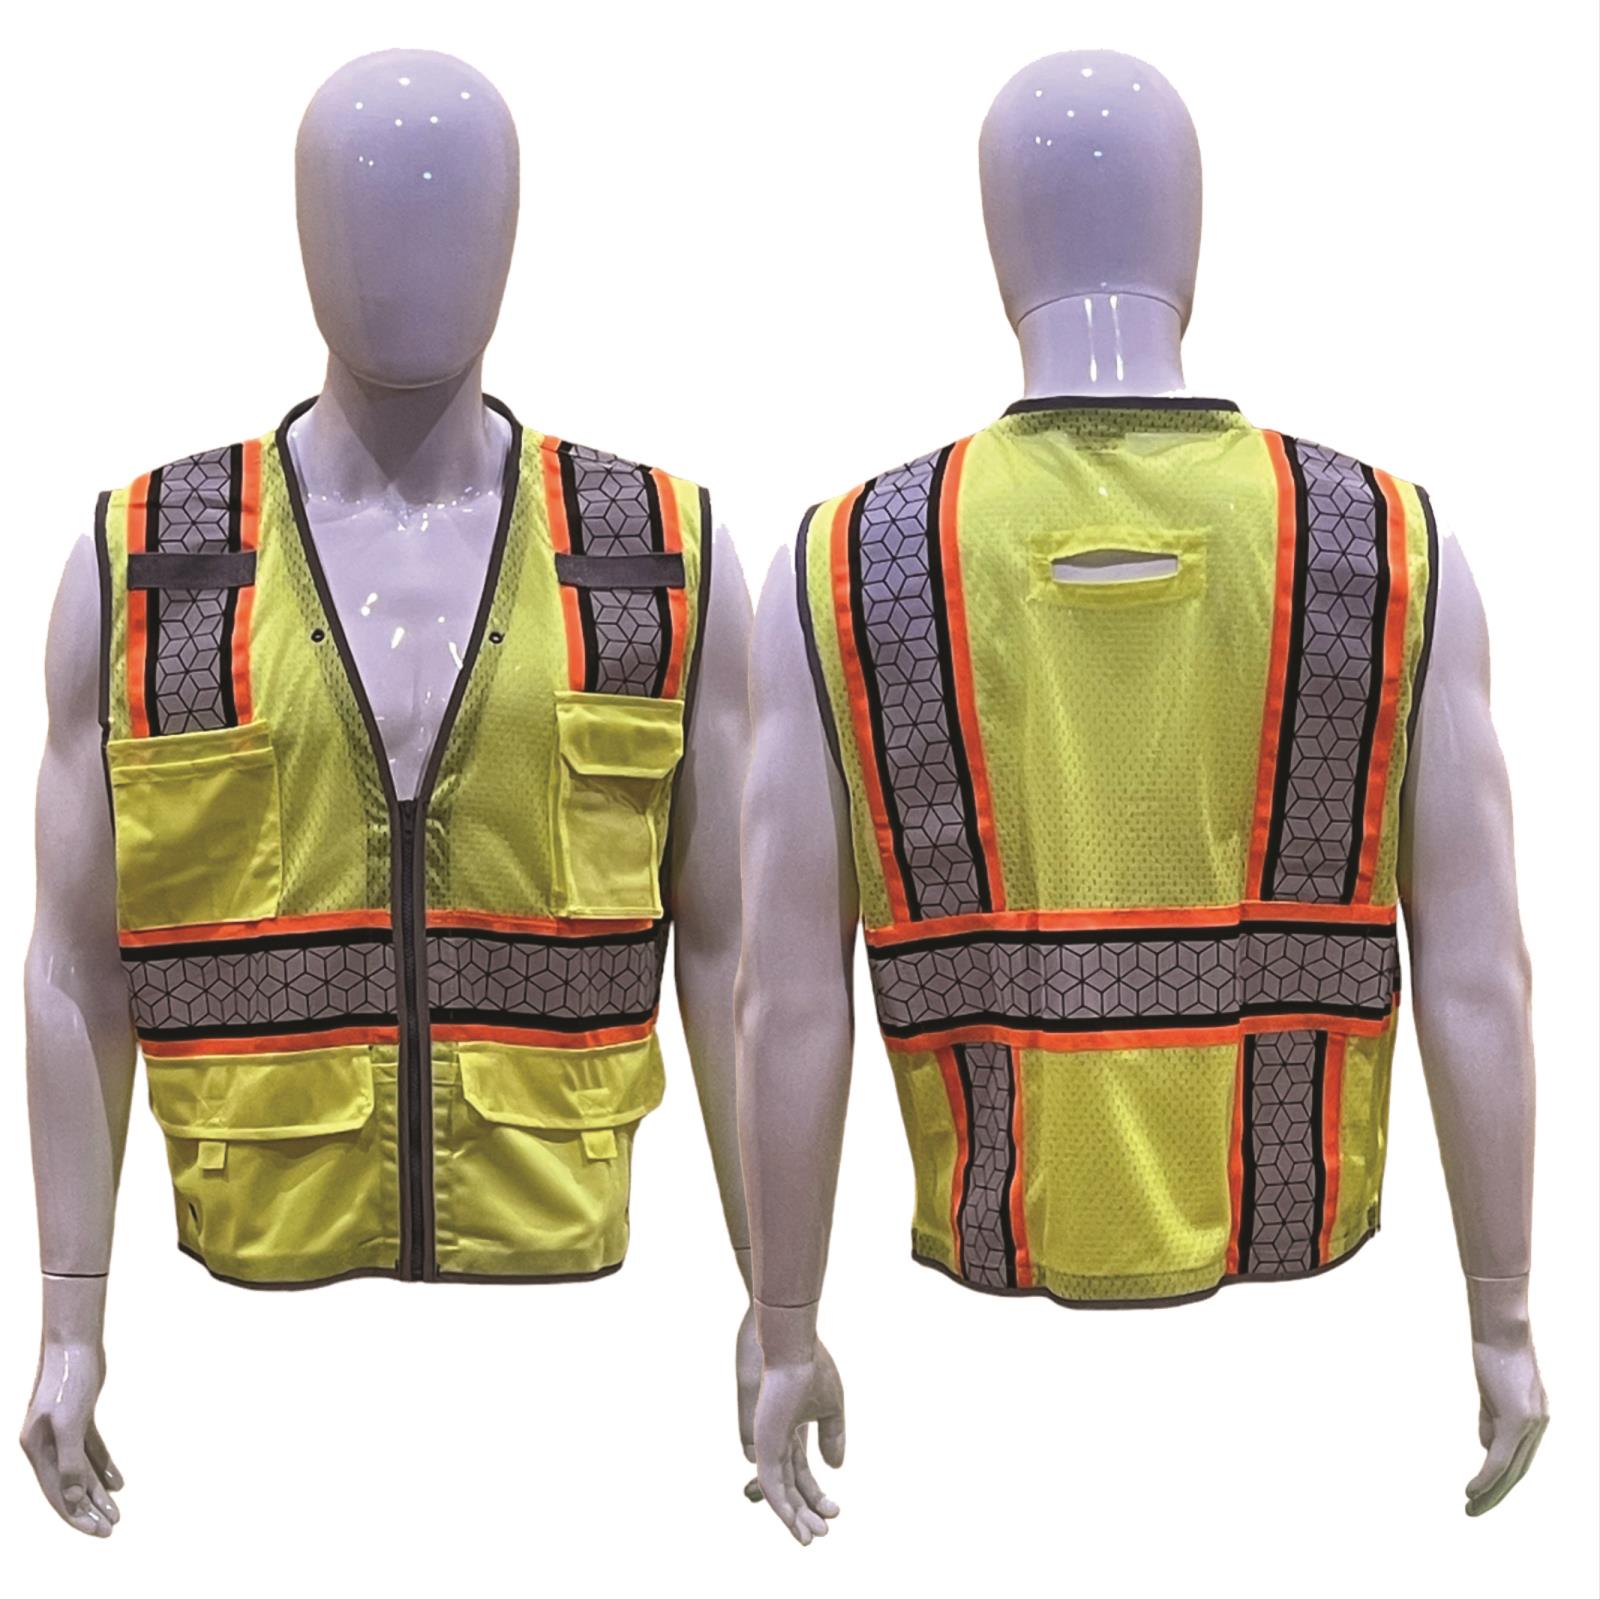 protective industrial products safety vests Off 78%